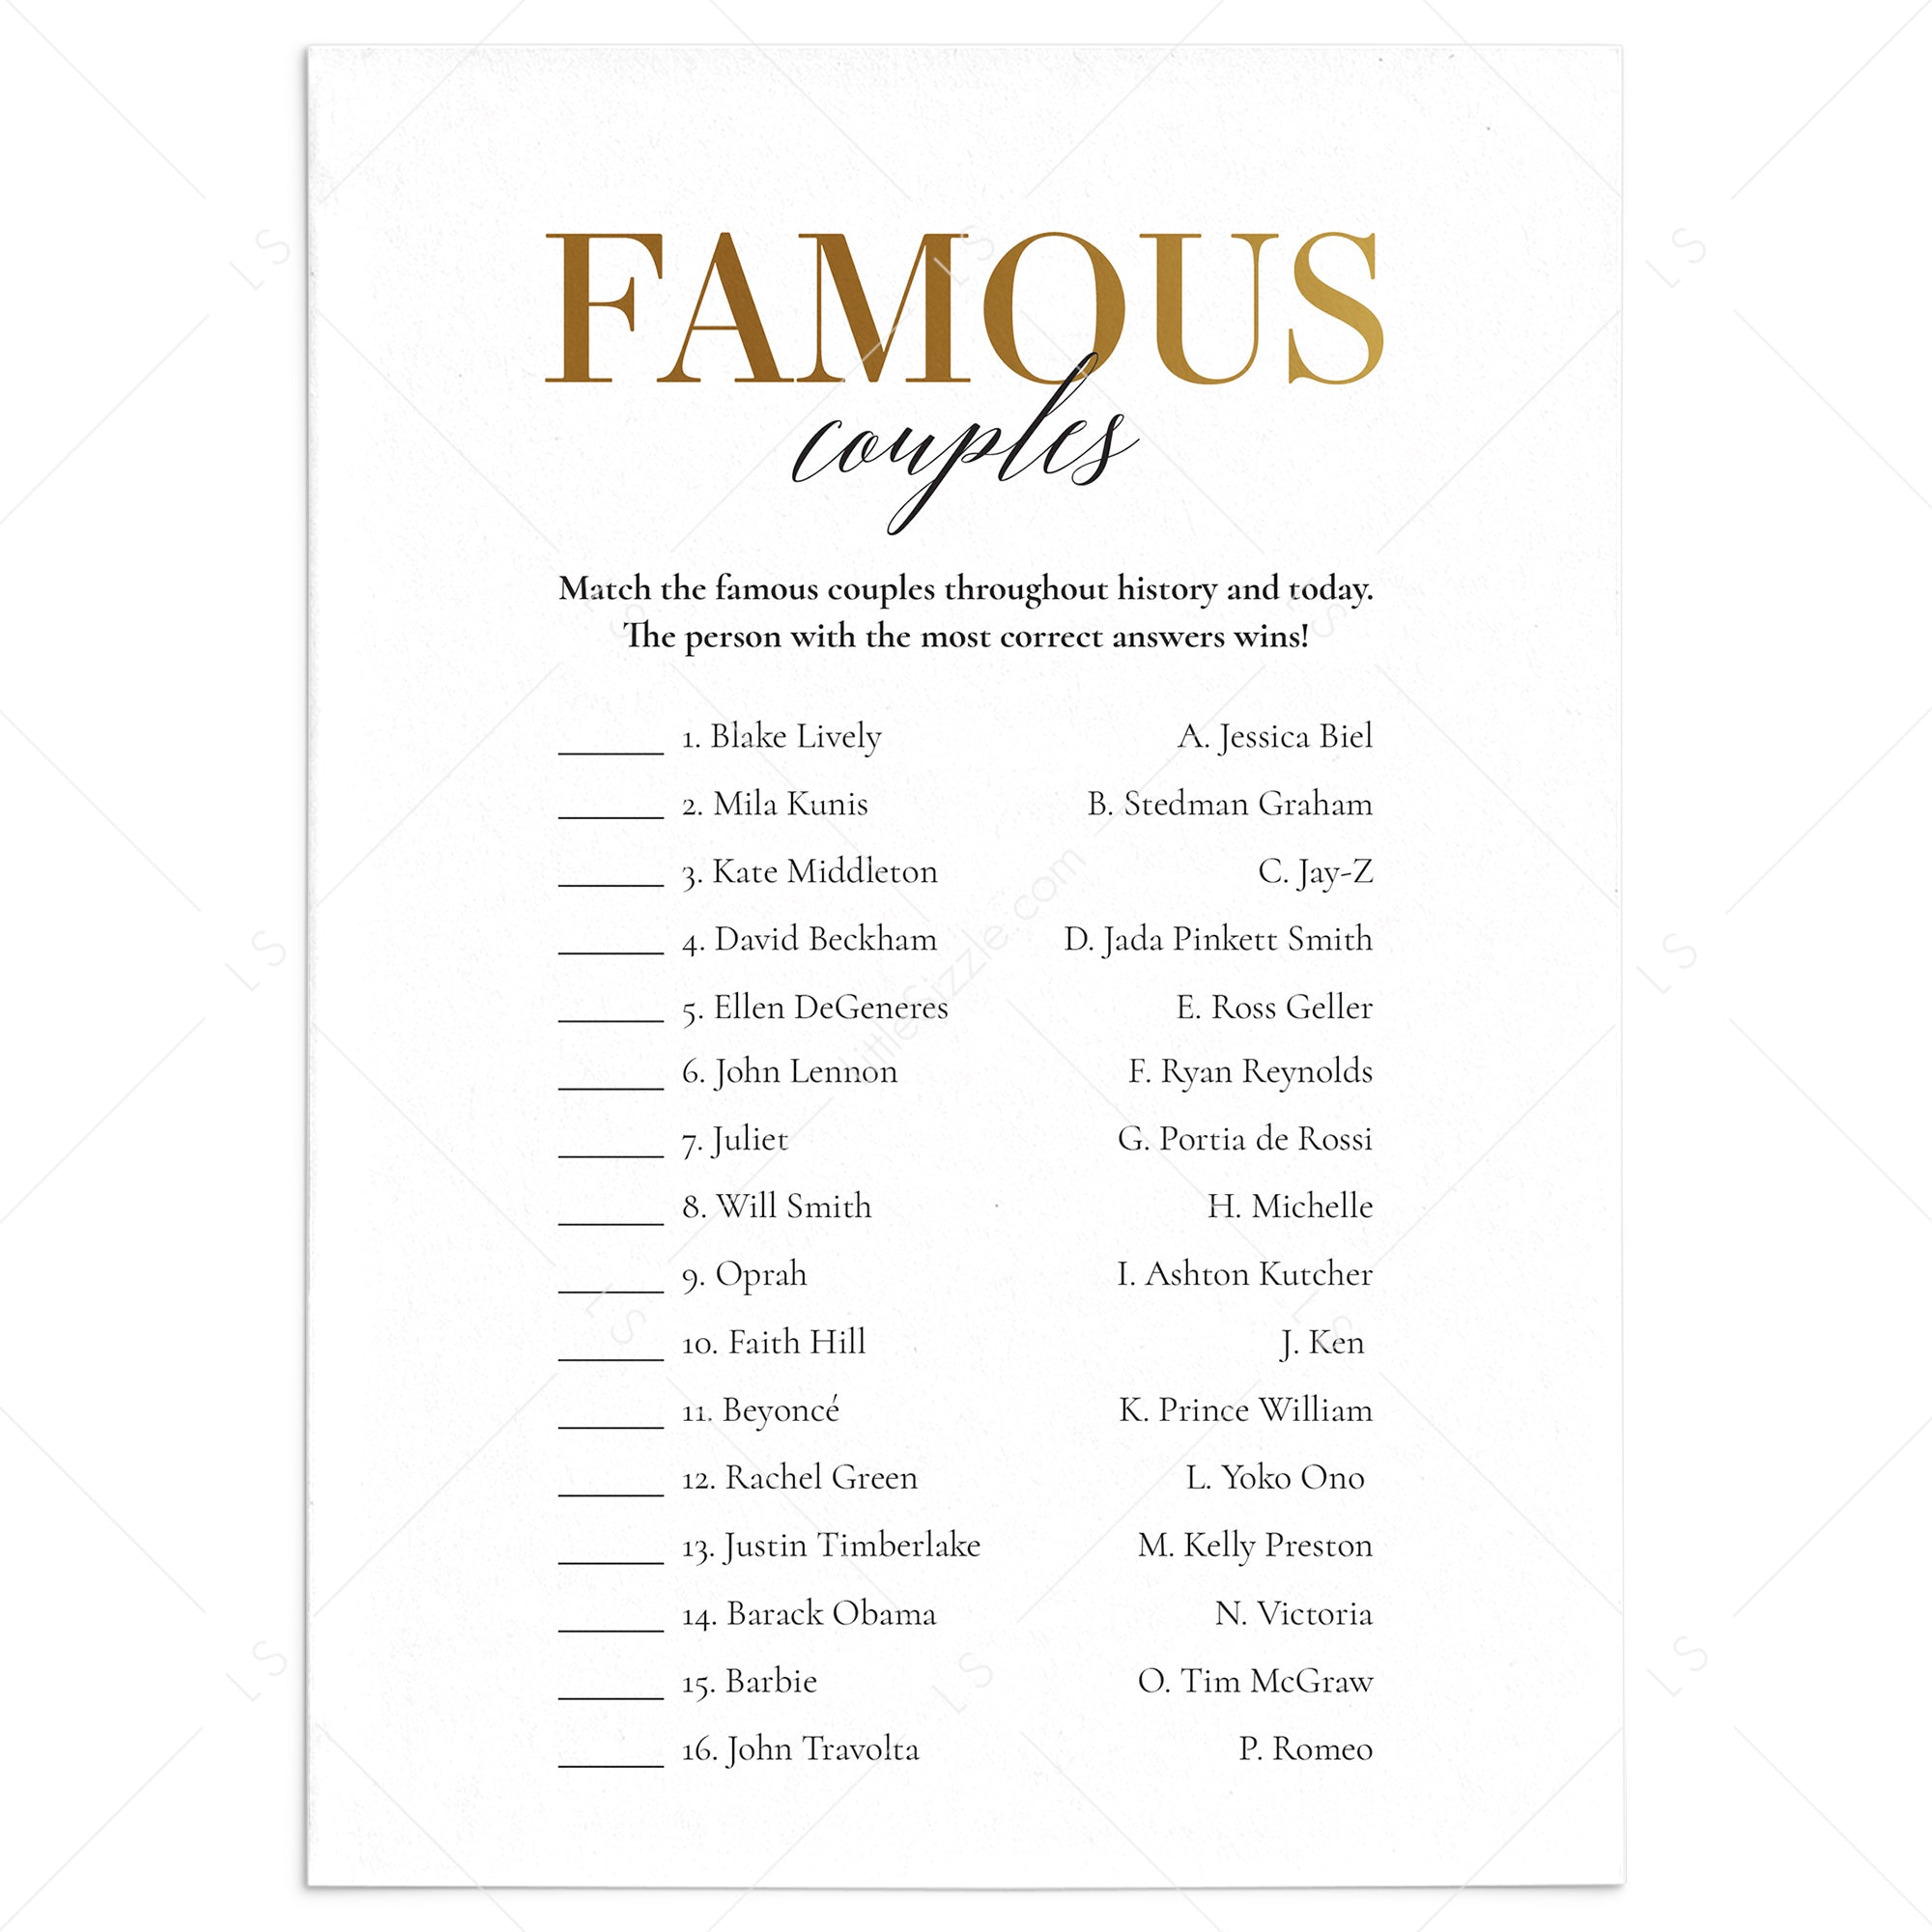 Gold Celebrity Couples Match Game with Answers Printable by LittleSizzle